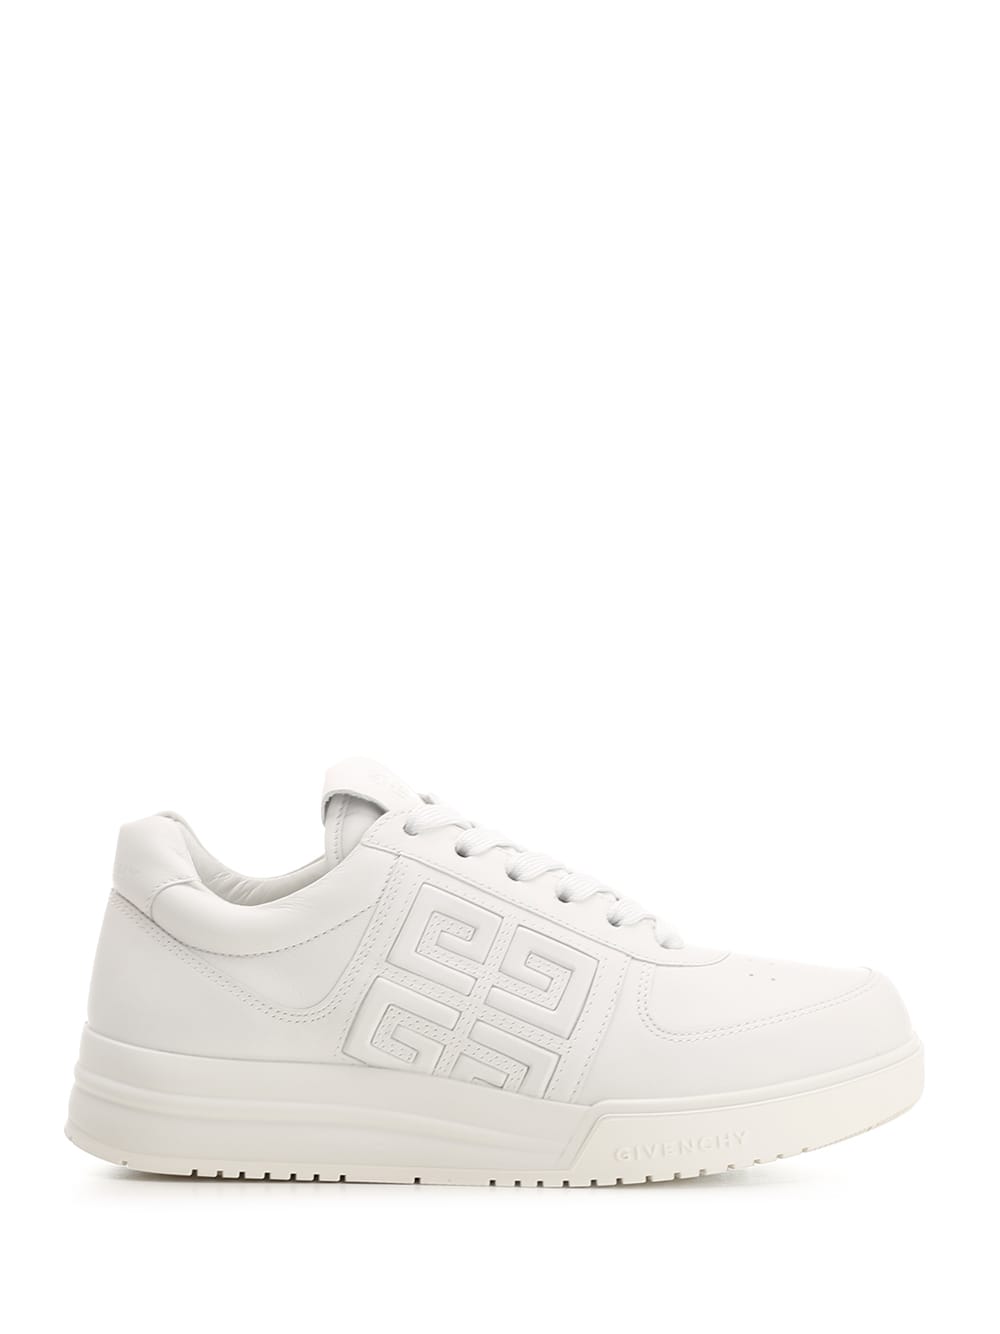 Givenchy 4g Low-top Sneakers In White